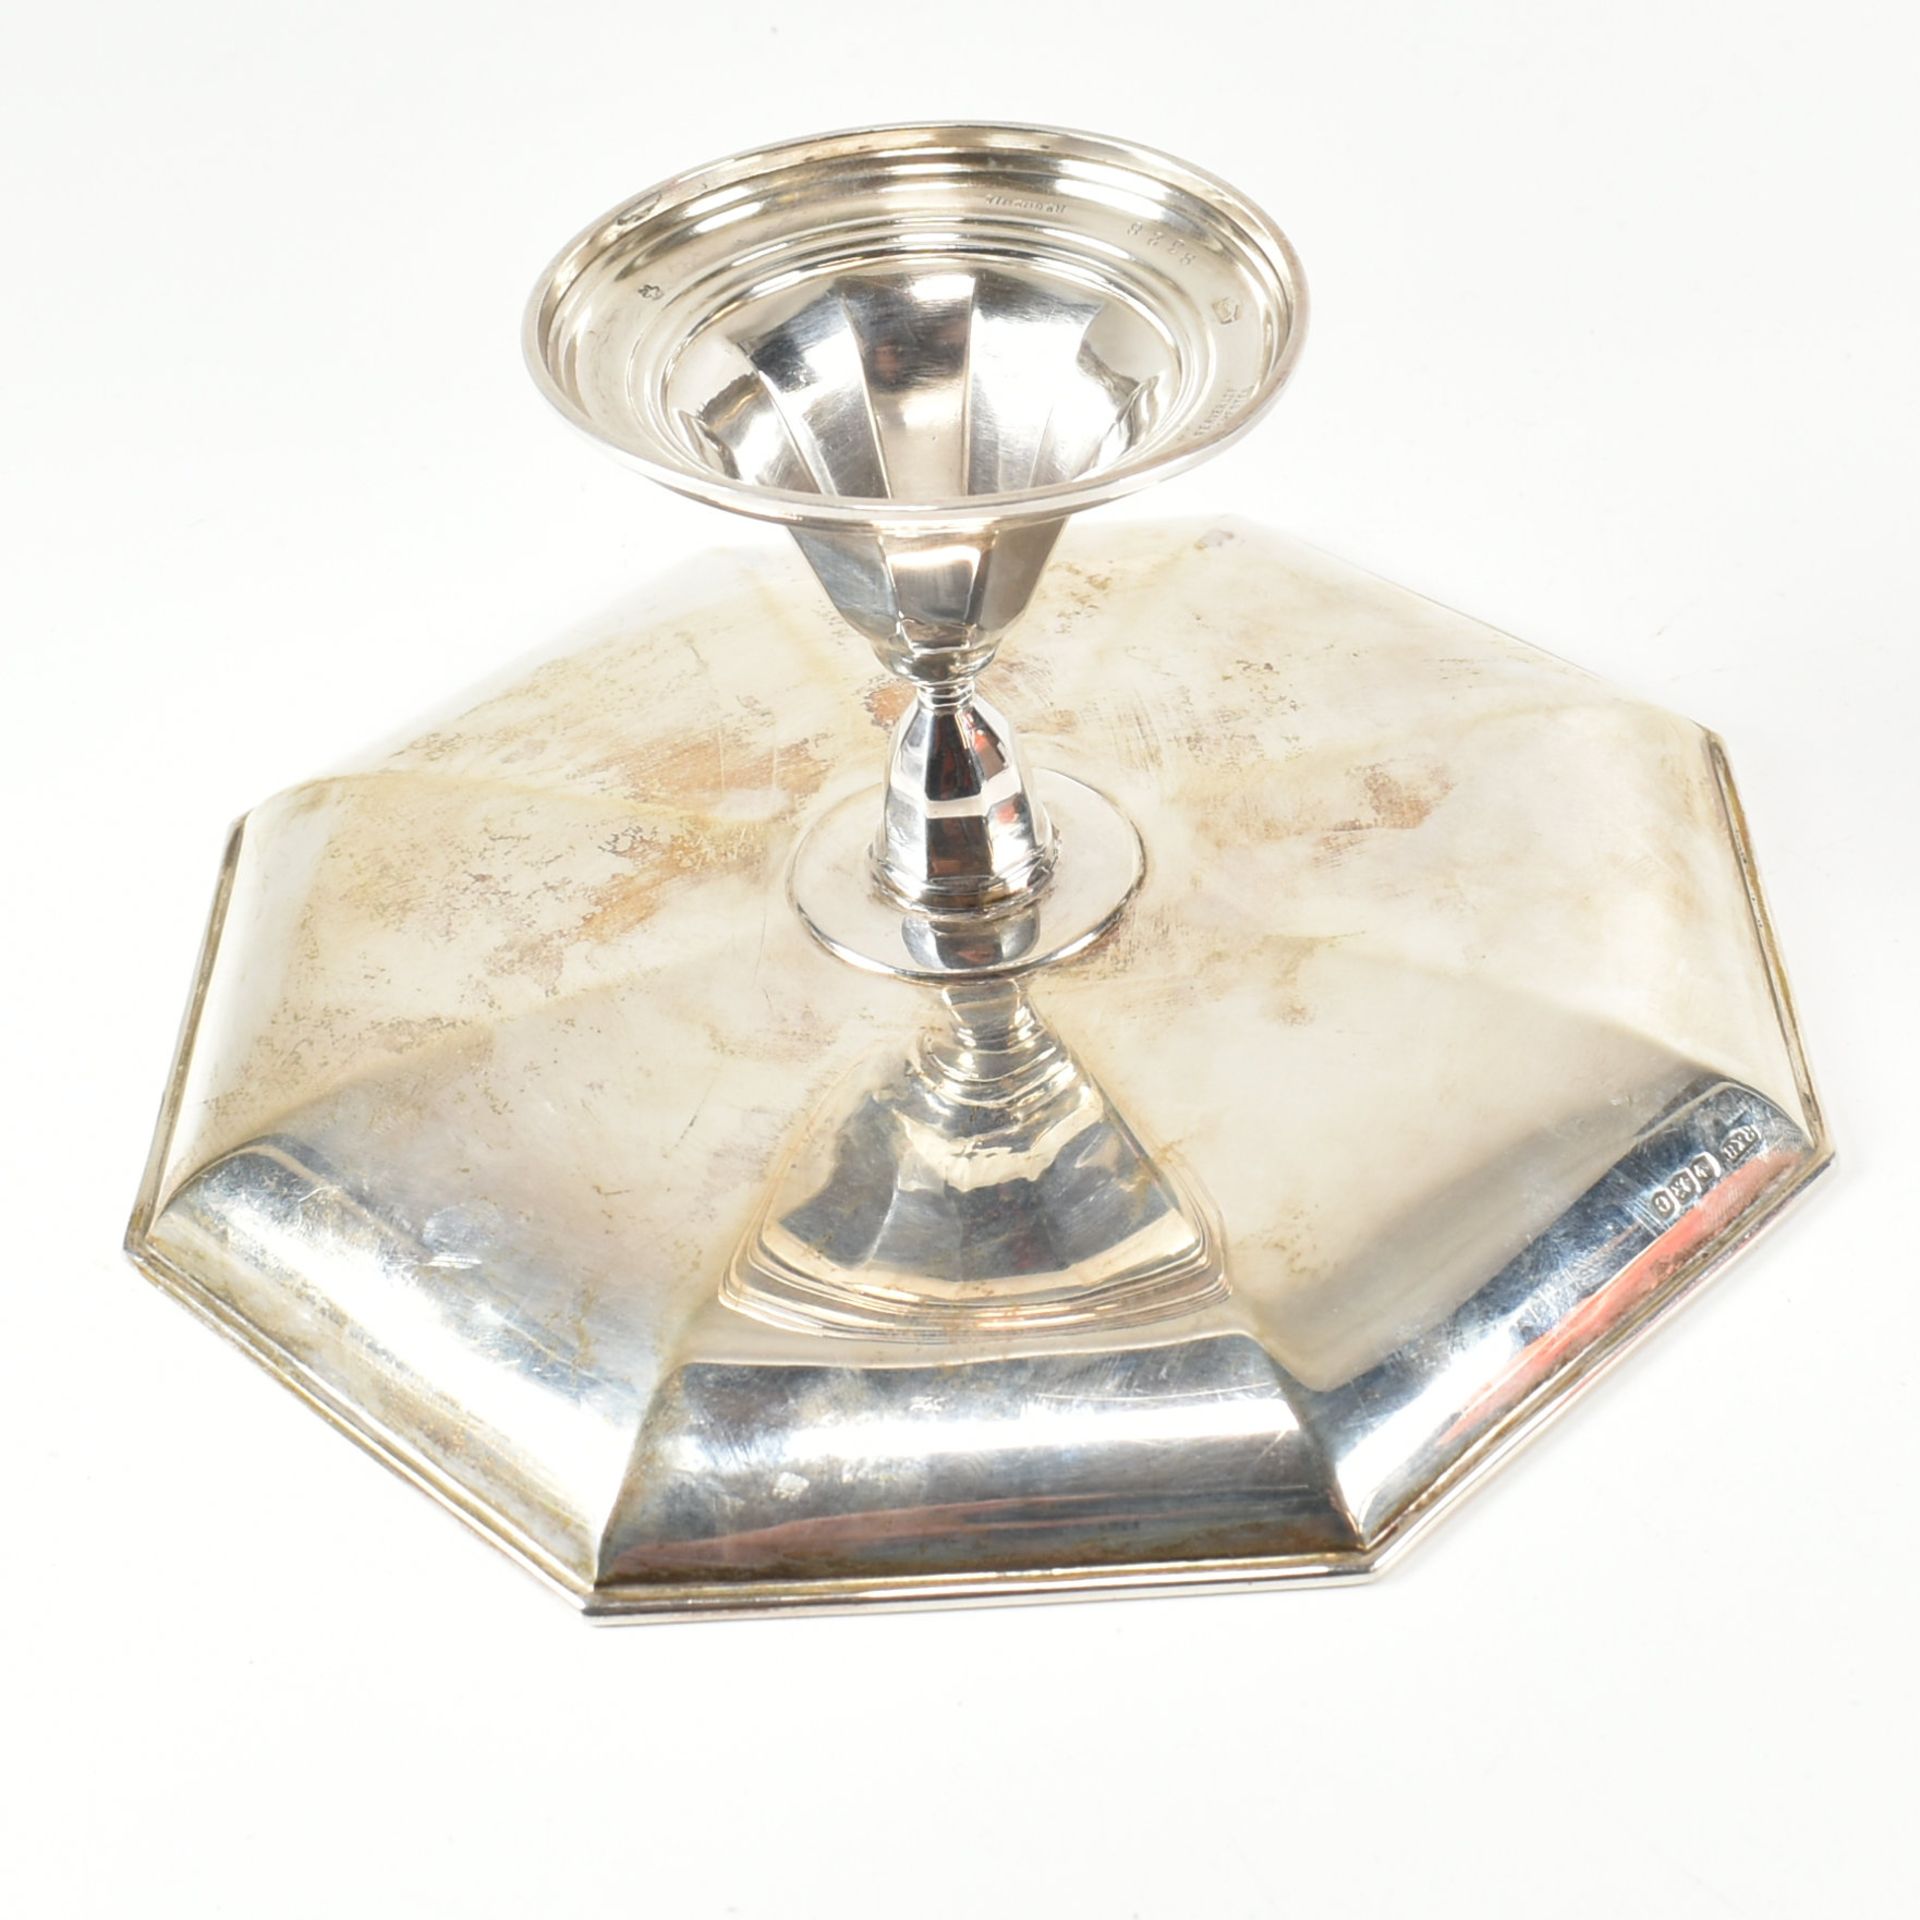 GEORGE V HALLMARKED SILVER CAKE STAND - Image 5 of 8